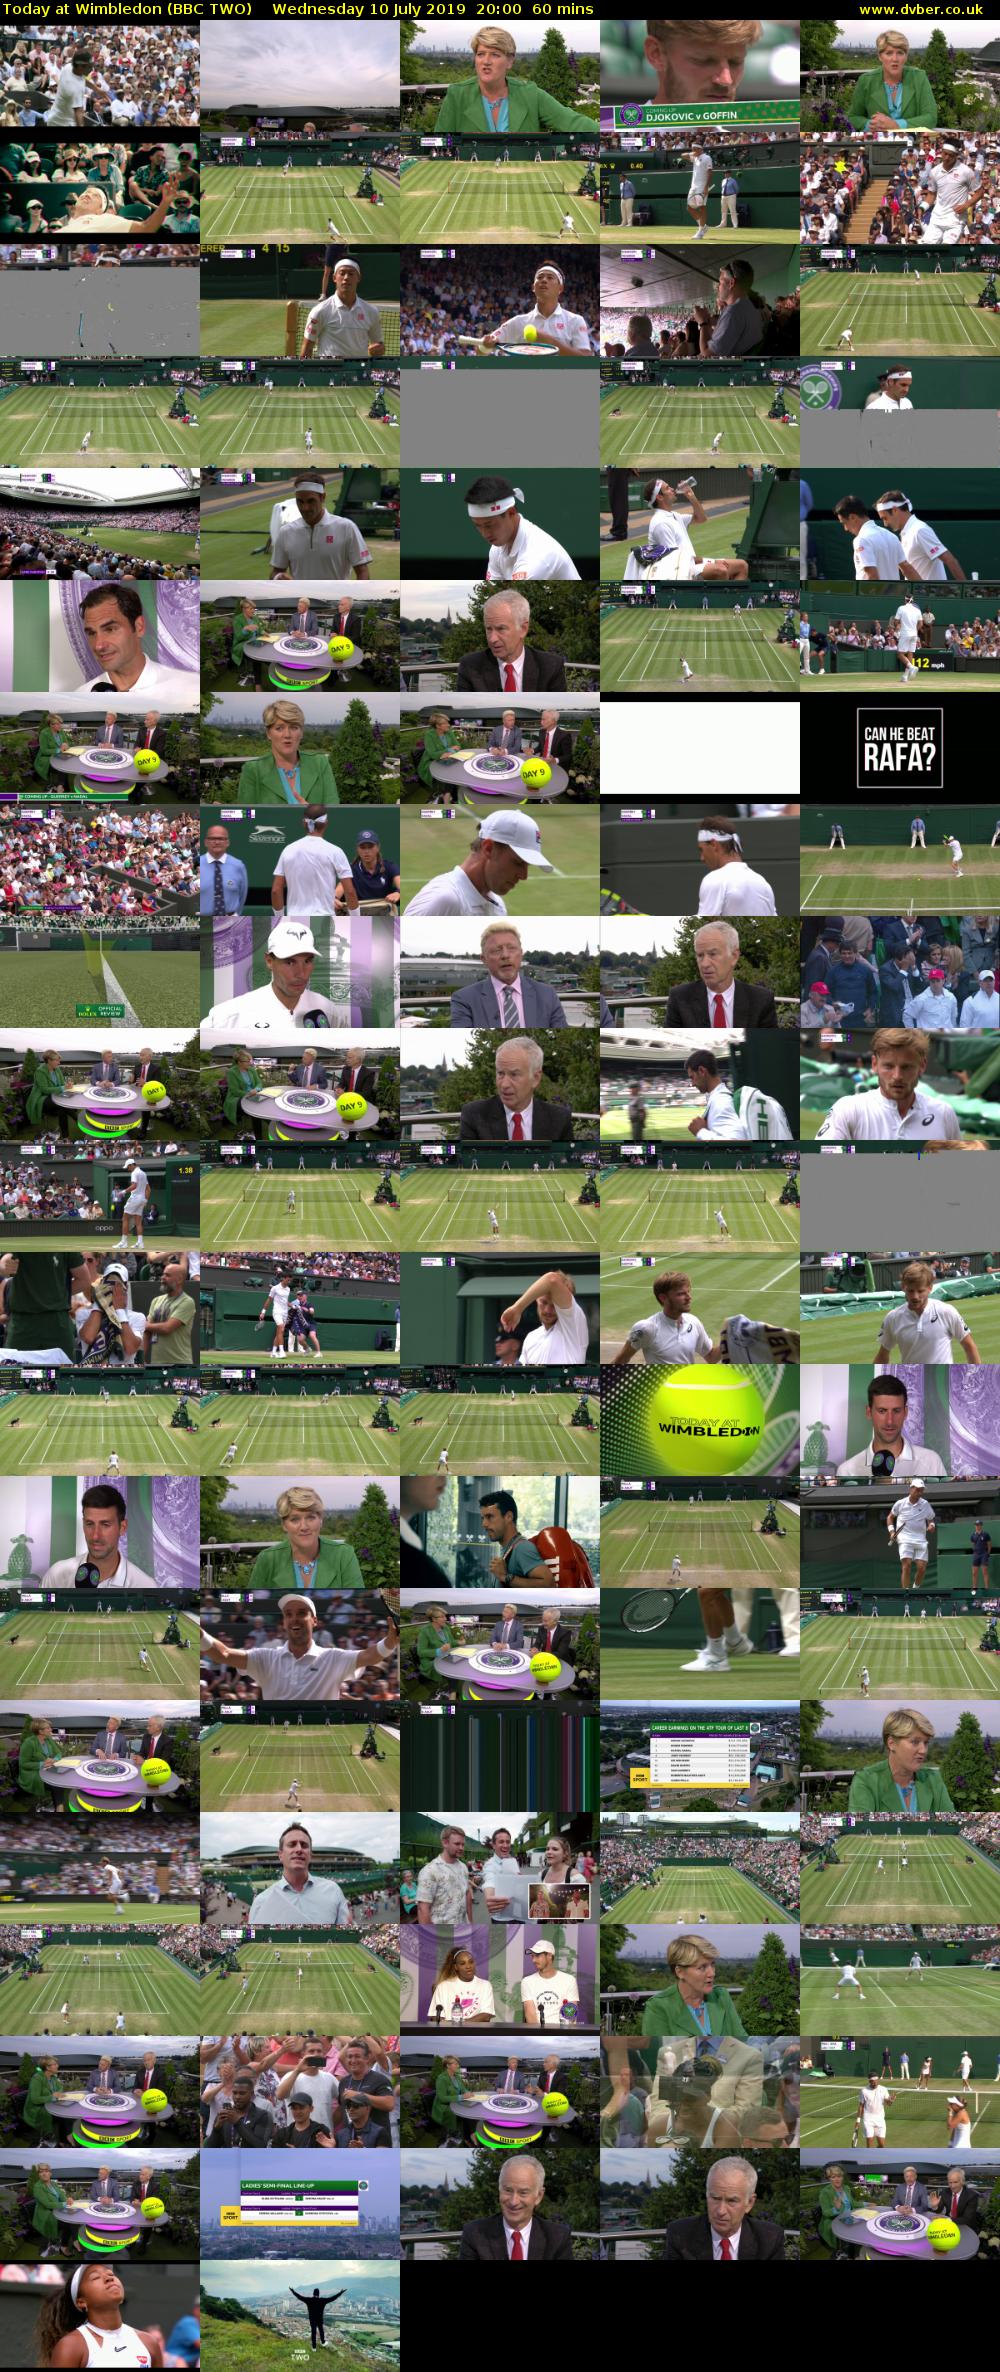 Today at Wimbledon (BBC TWO) Wednesday 10 July 2019 20:00 - 21:00